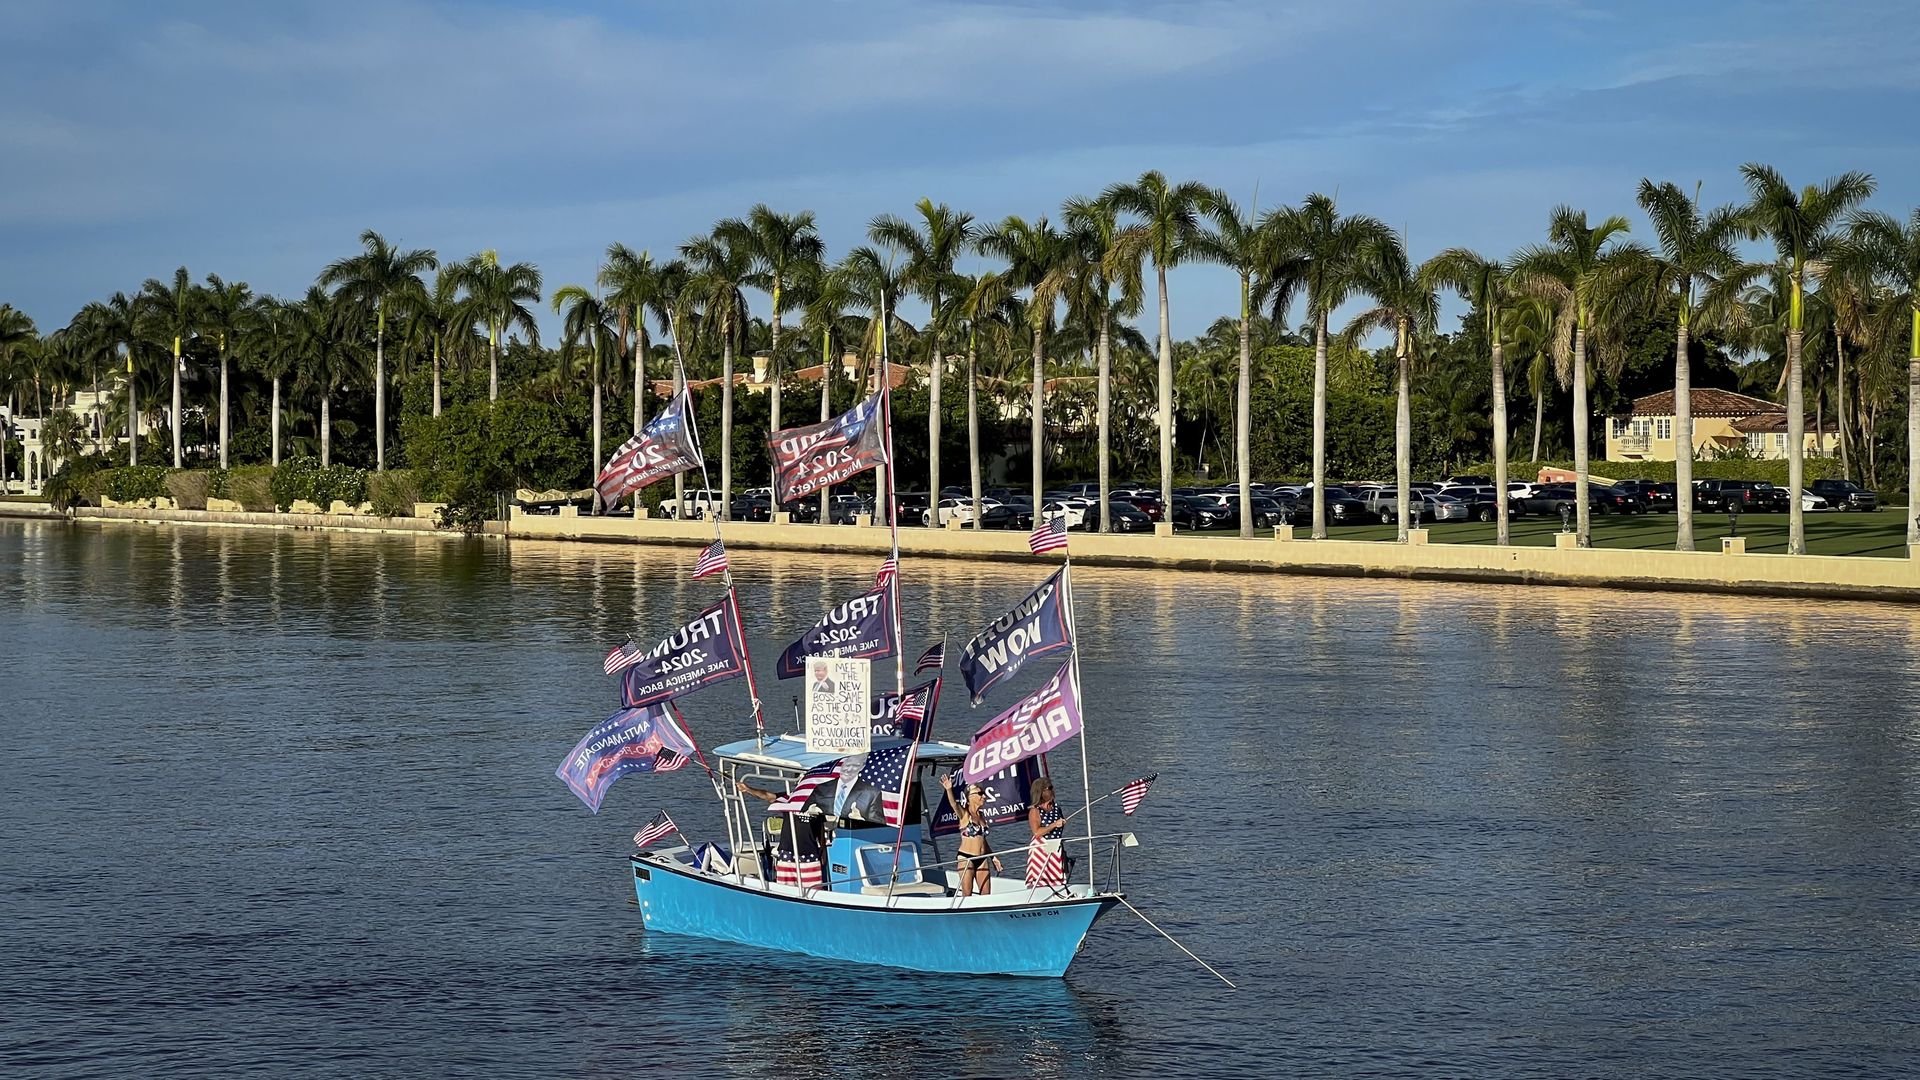 A boat bearing flags in support of Donald Trump floats near Palm Beach